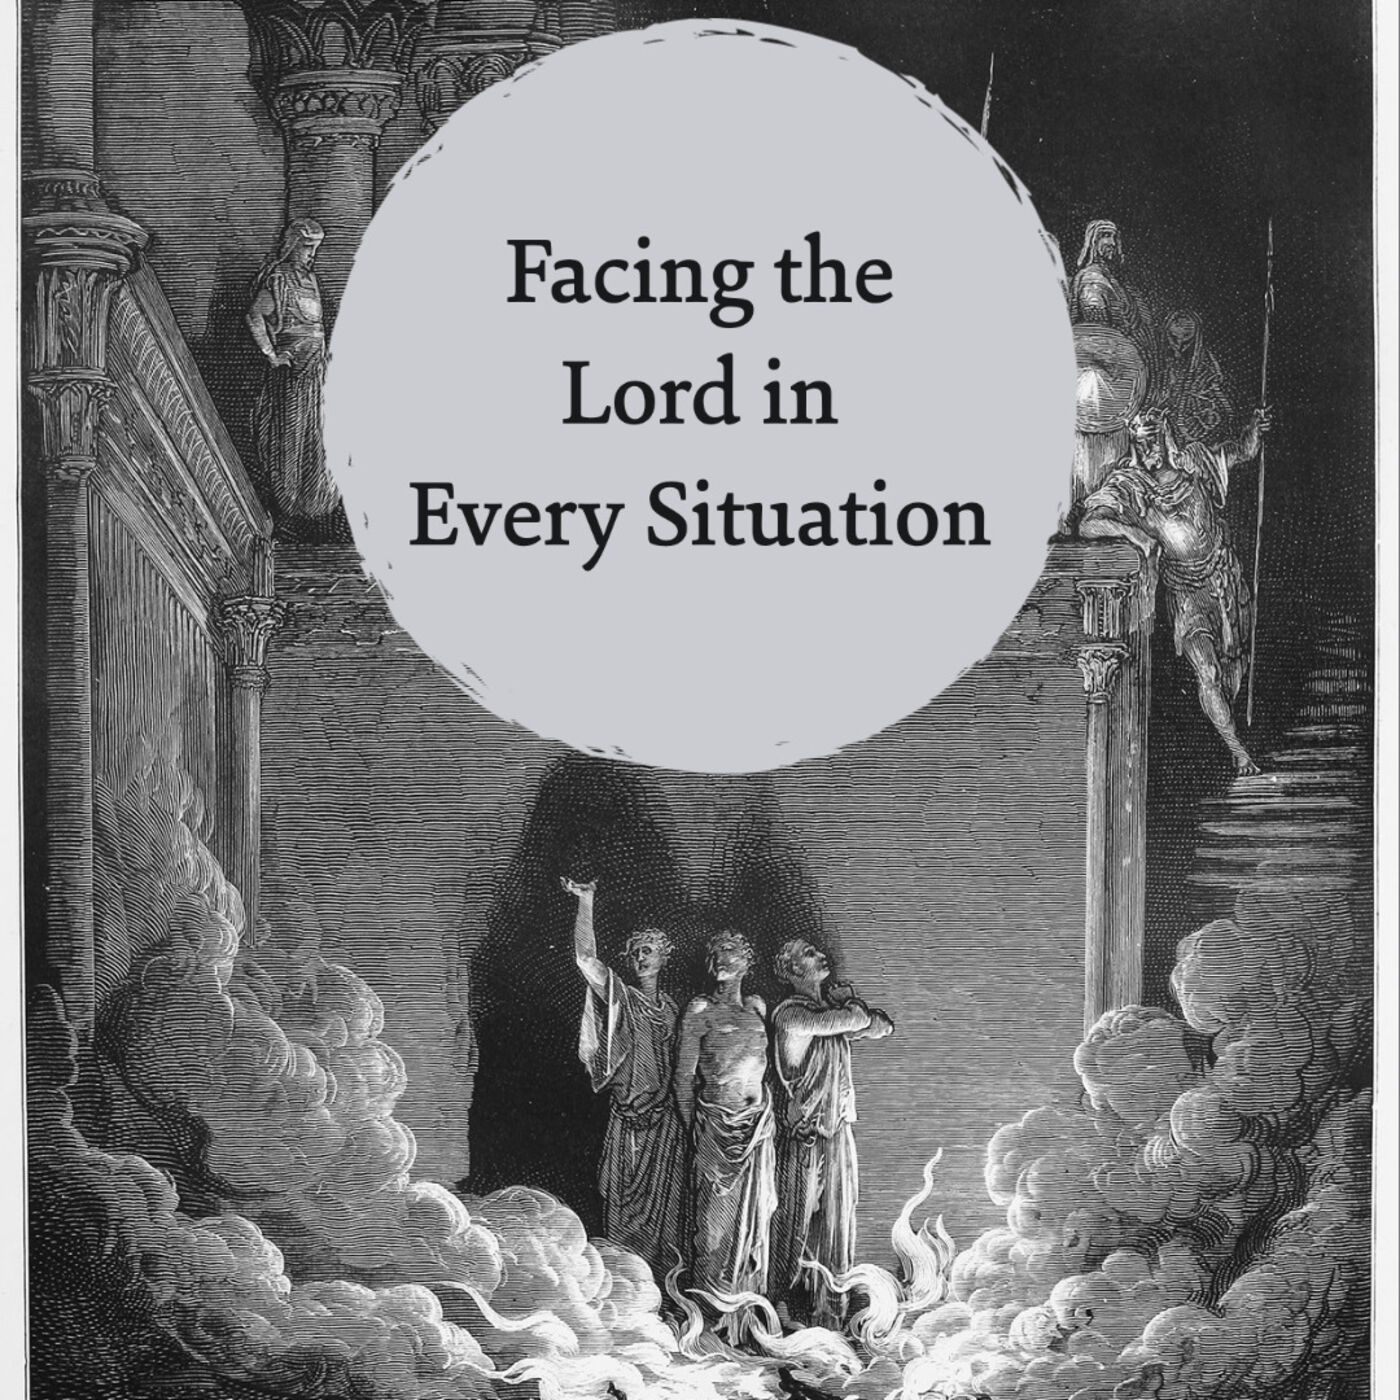 Facing the Lord in Every Situation